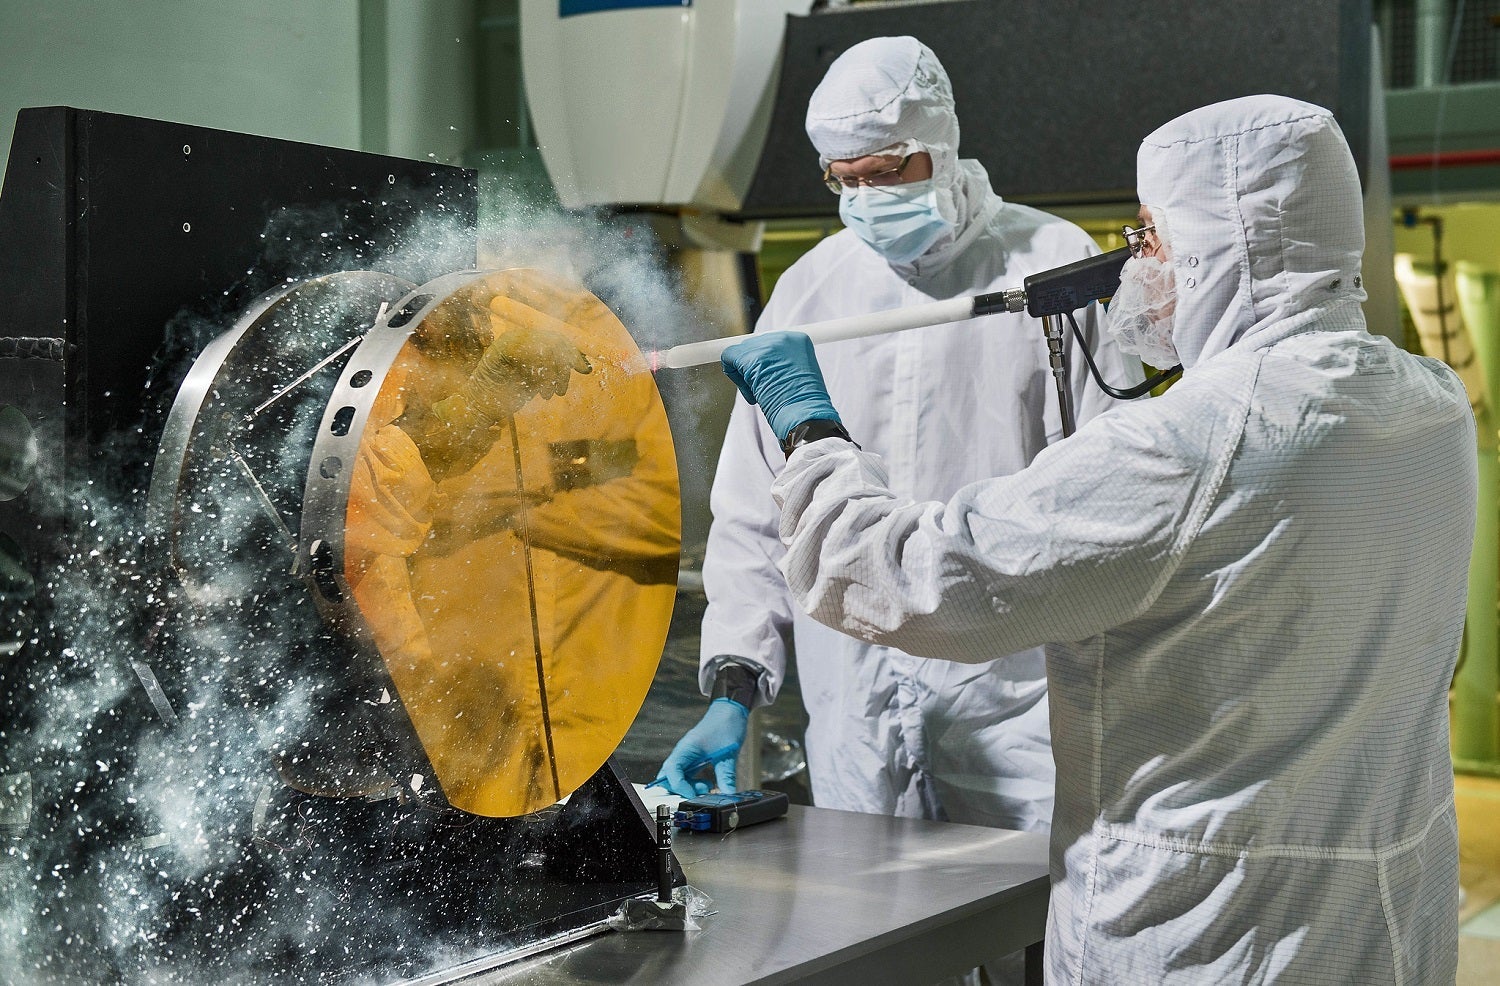 Just like drivers sometimes use snow to clean their car mirrors in winter, two Exelis Inc. engineers are practicing âsnow cleaning'â on a test telescope mirror.